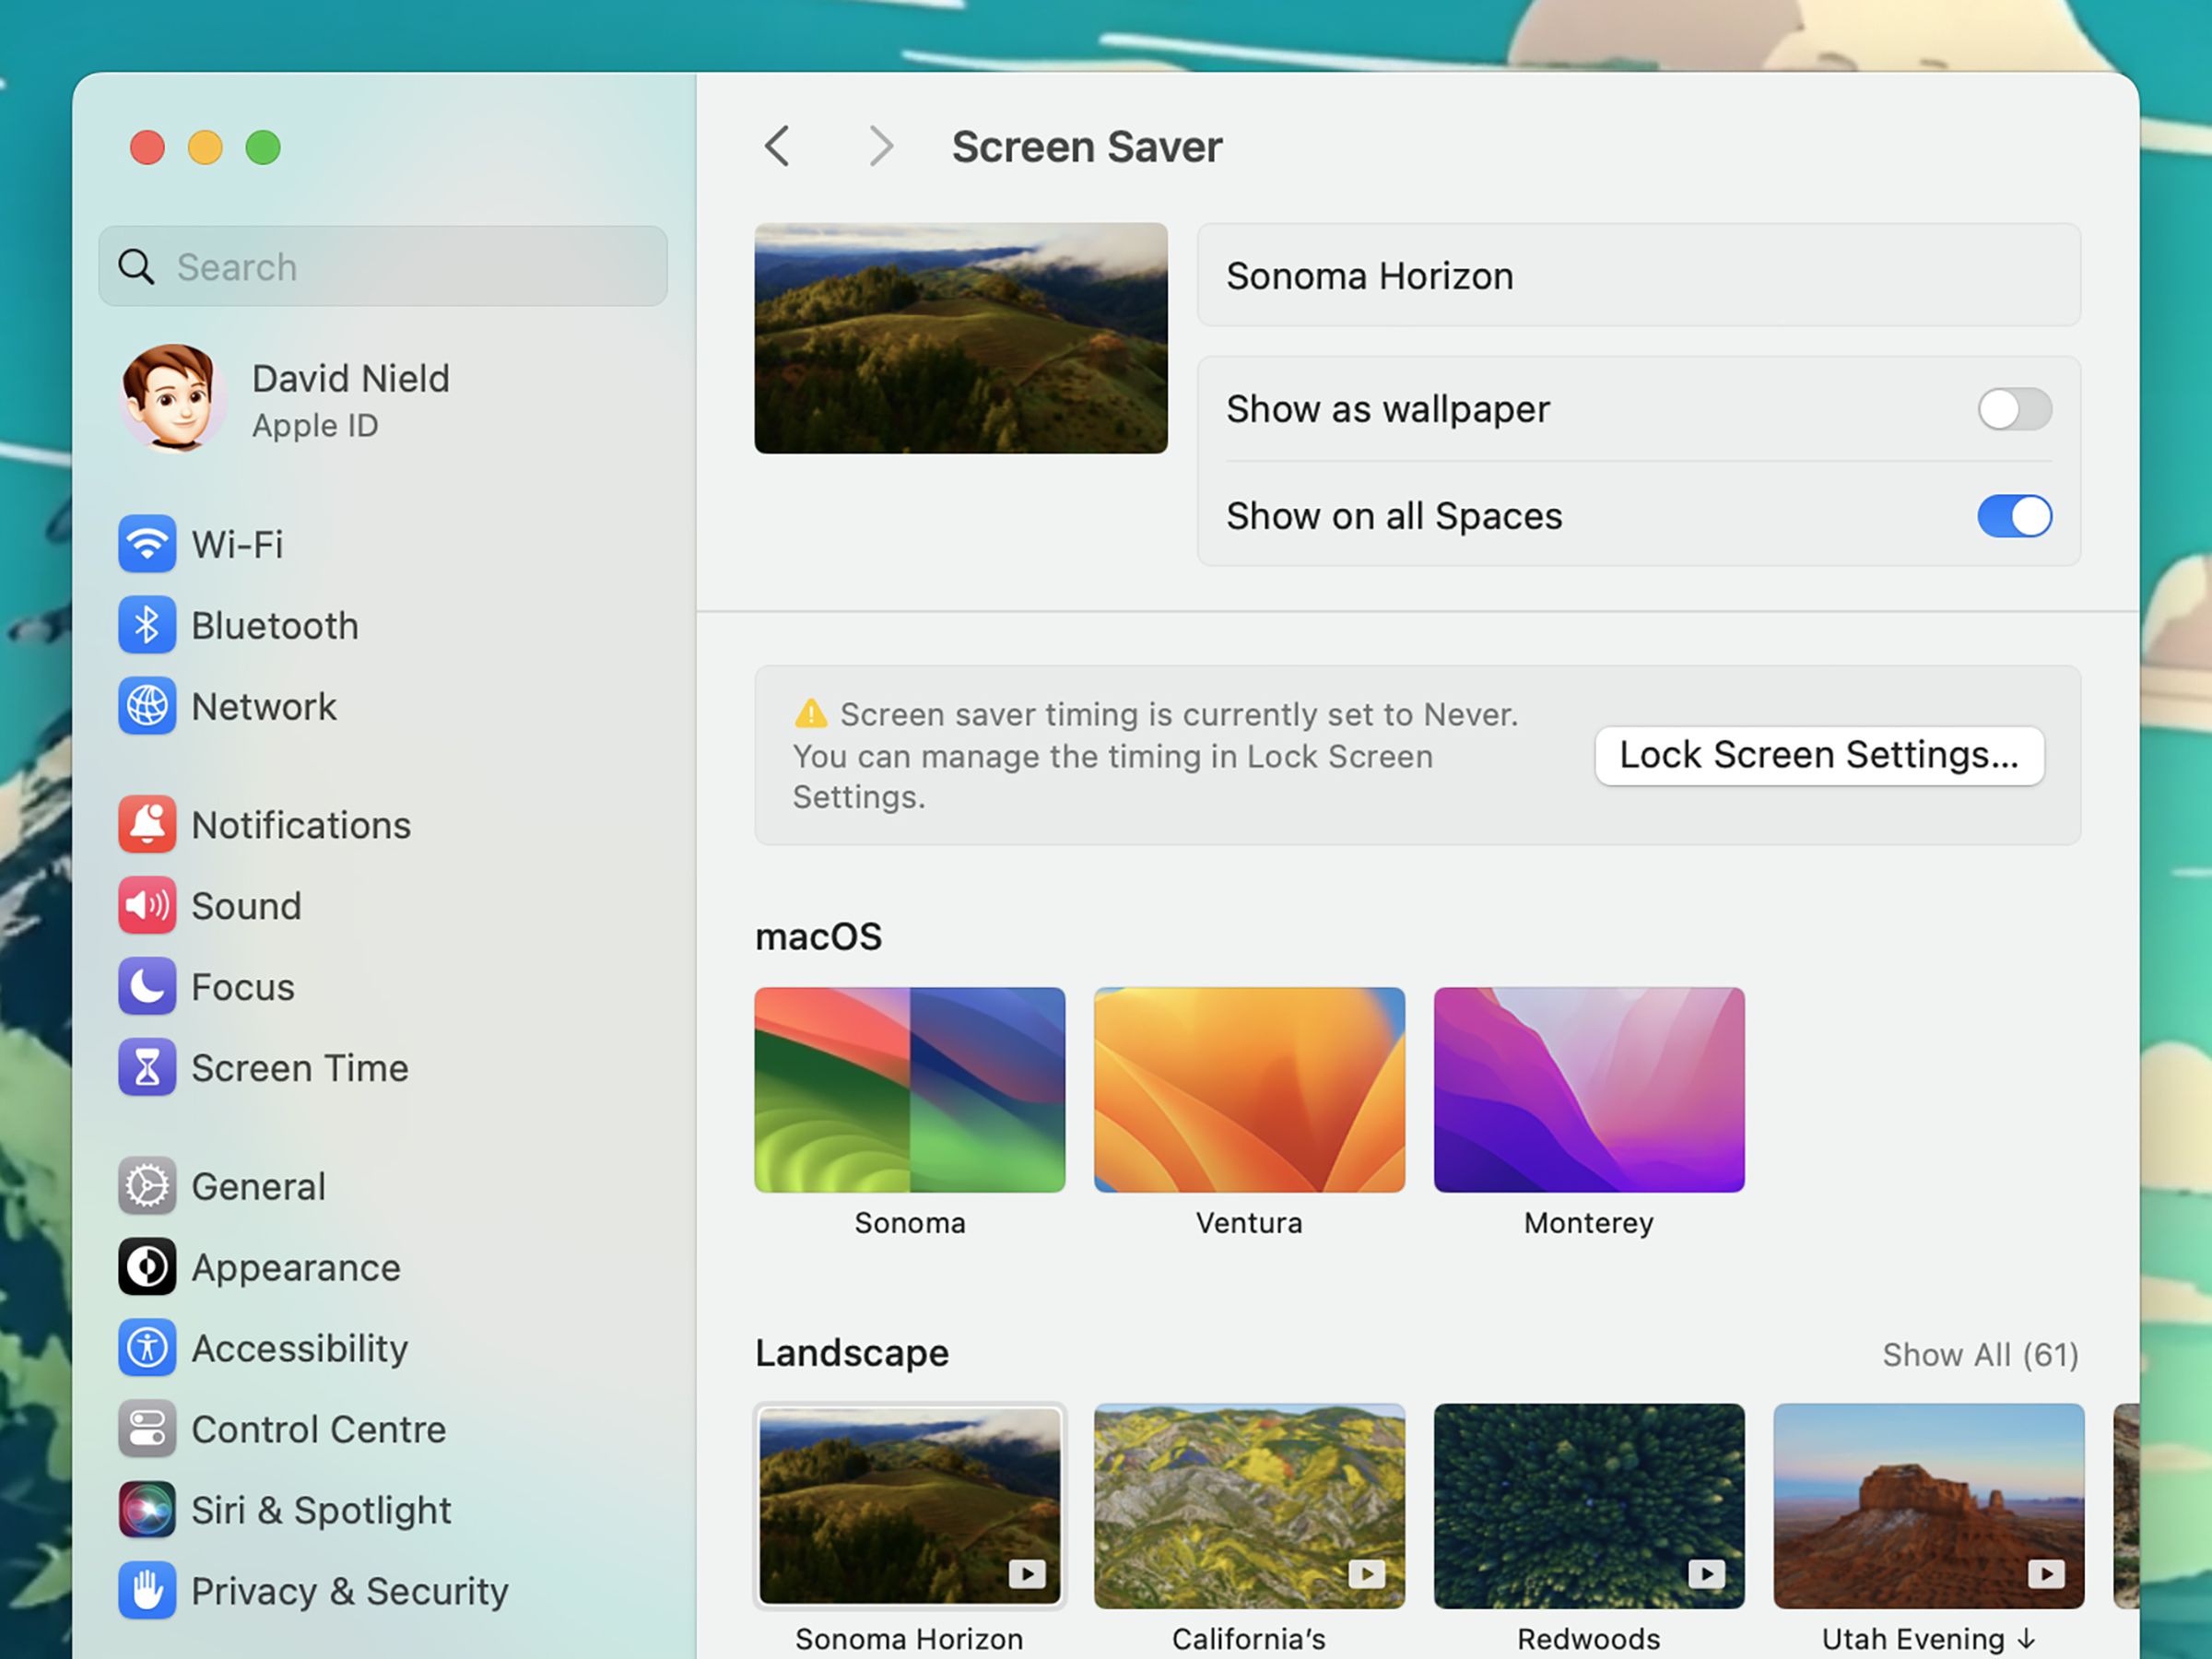 Screen saver page showing “Sonoma Horizon” below which are other choices from macOS and Landscape categories.